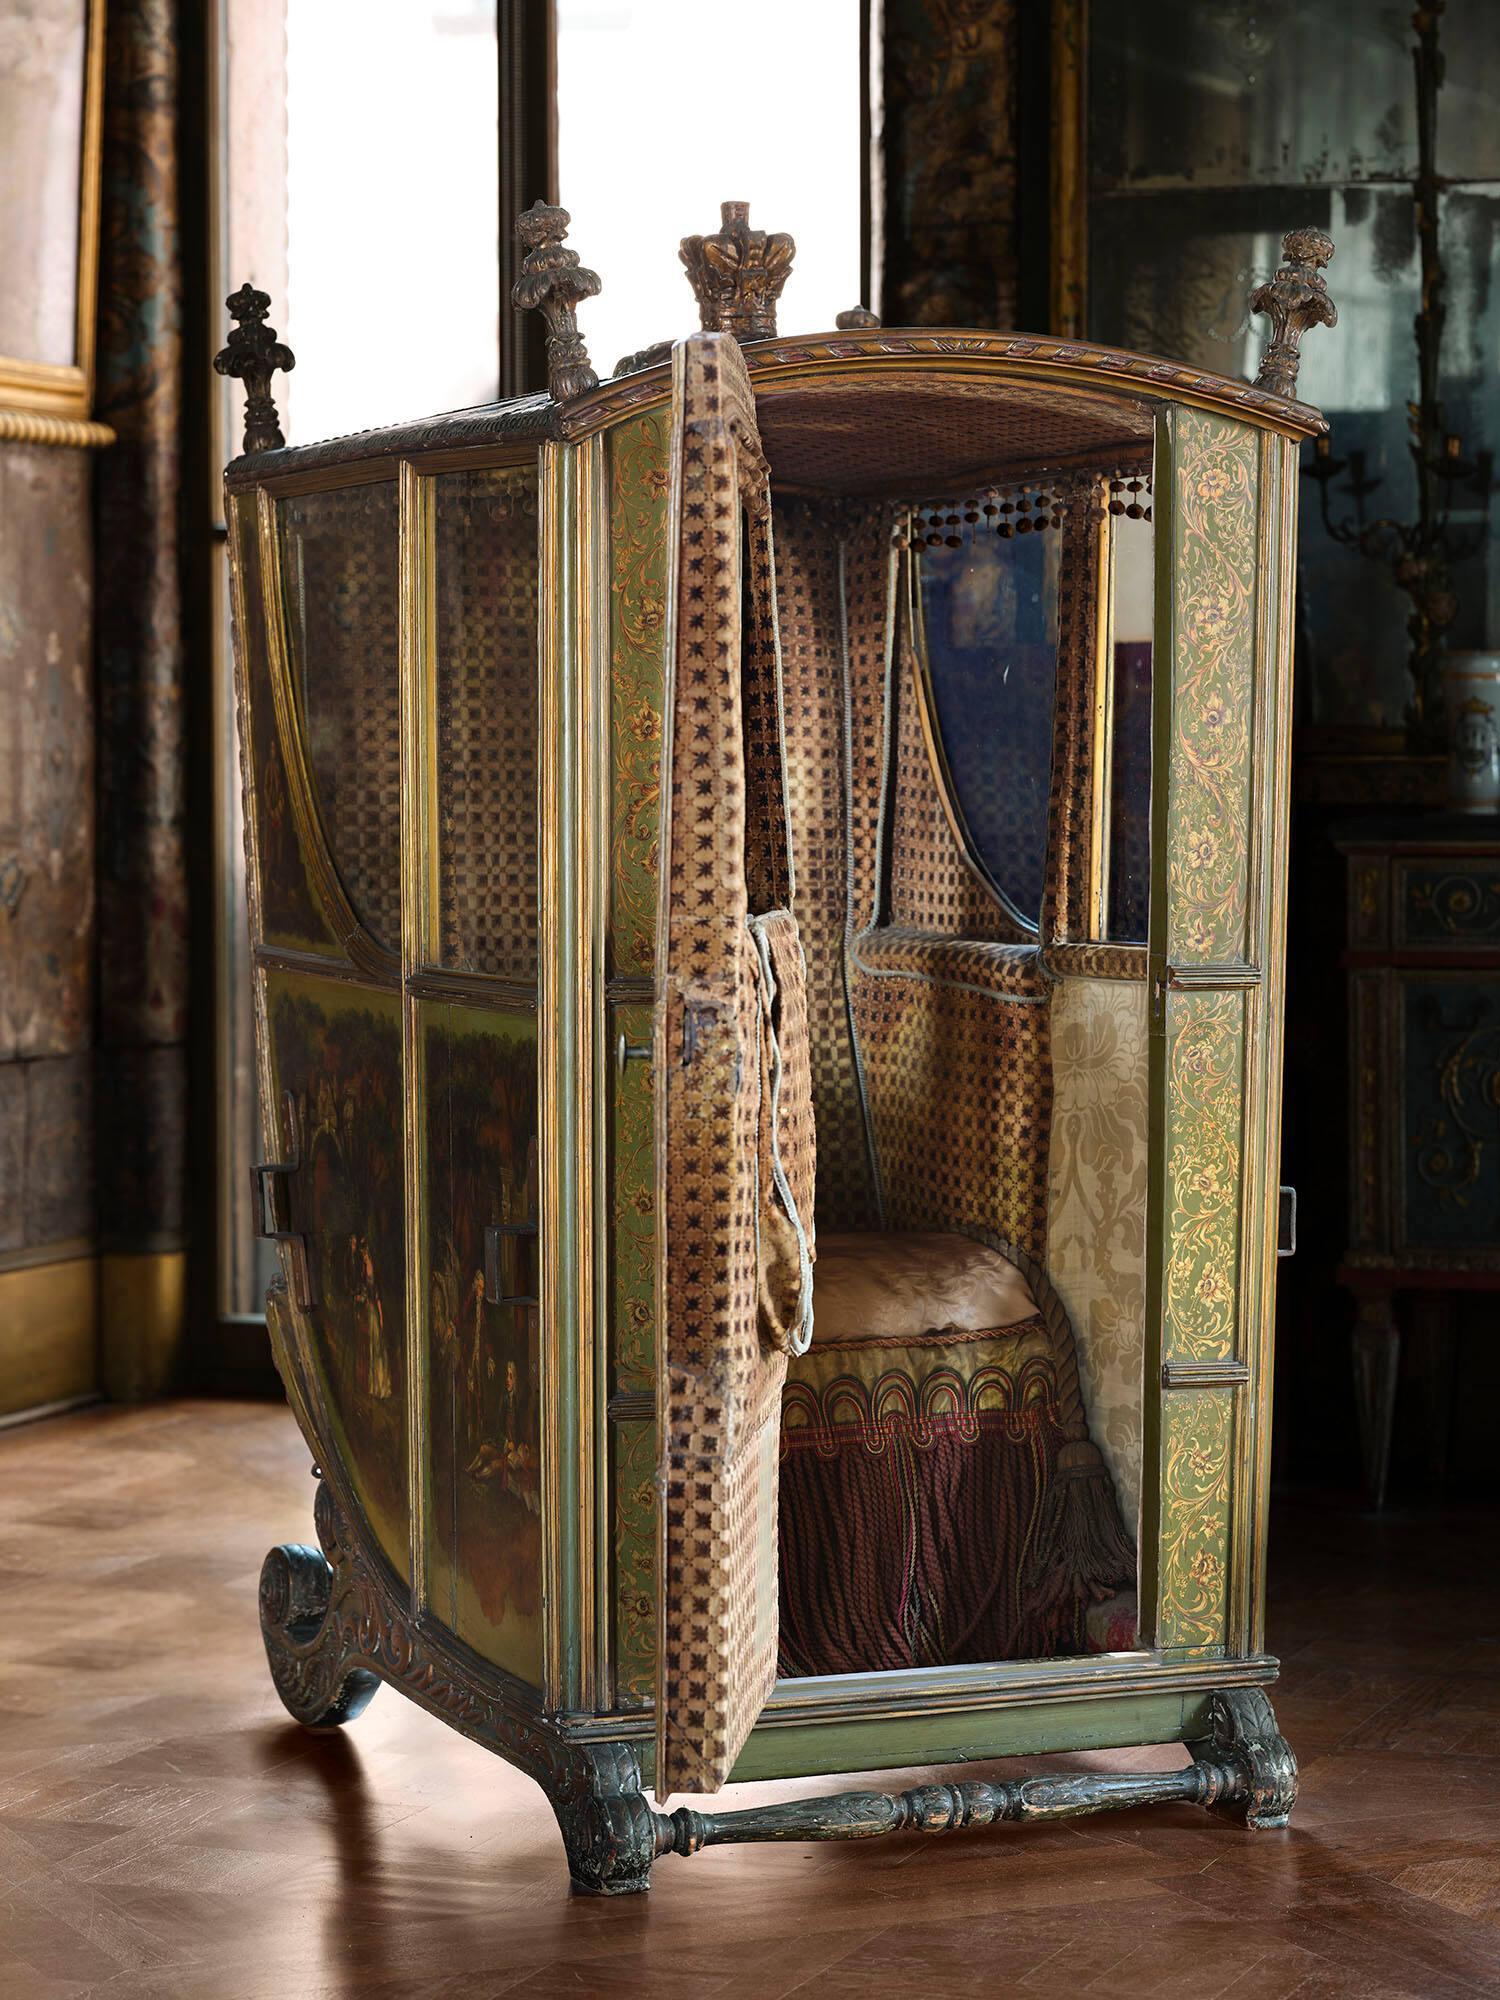 The sedan chair in the Gardner Museum’s Veronese Room with the door opened to show the interior lined with fabric and the cushion edged with long tassels